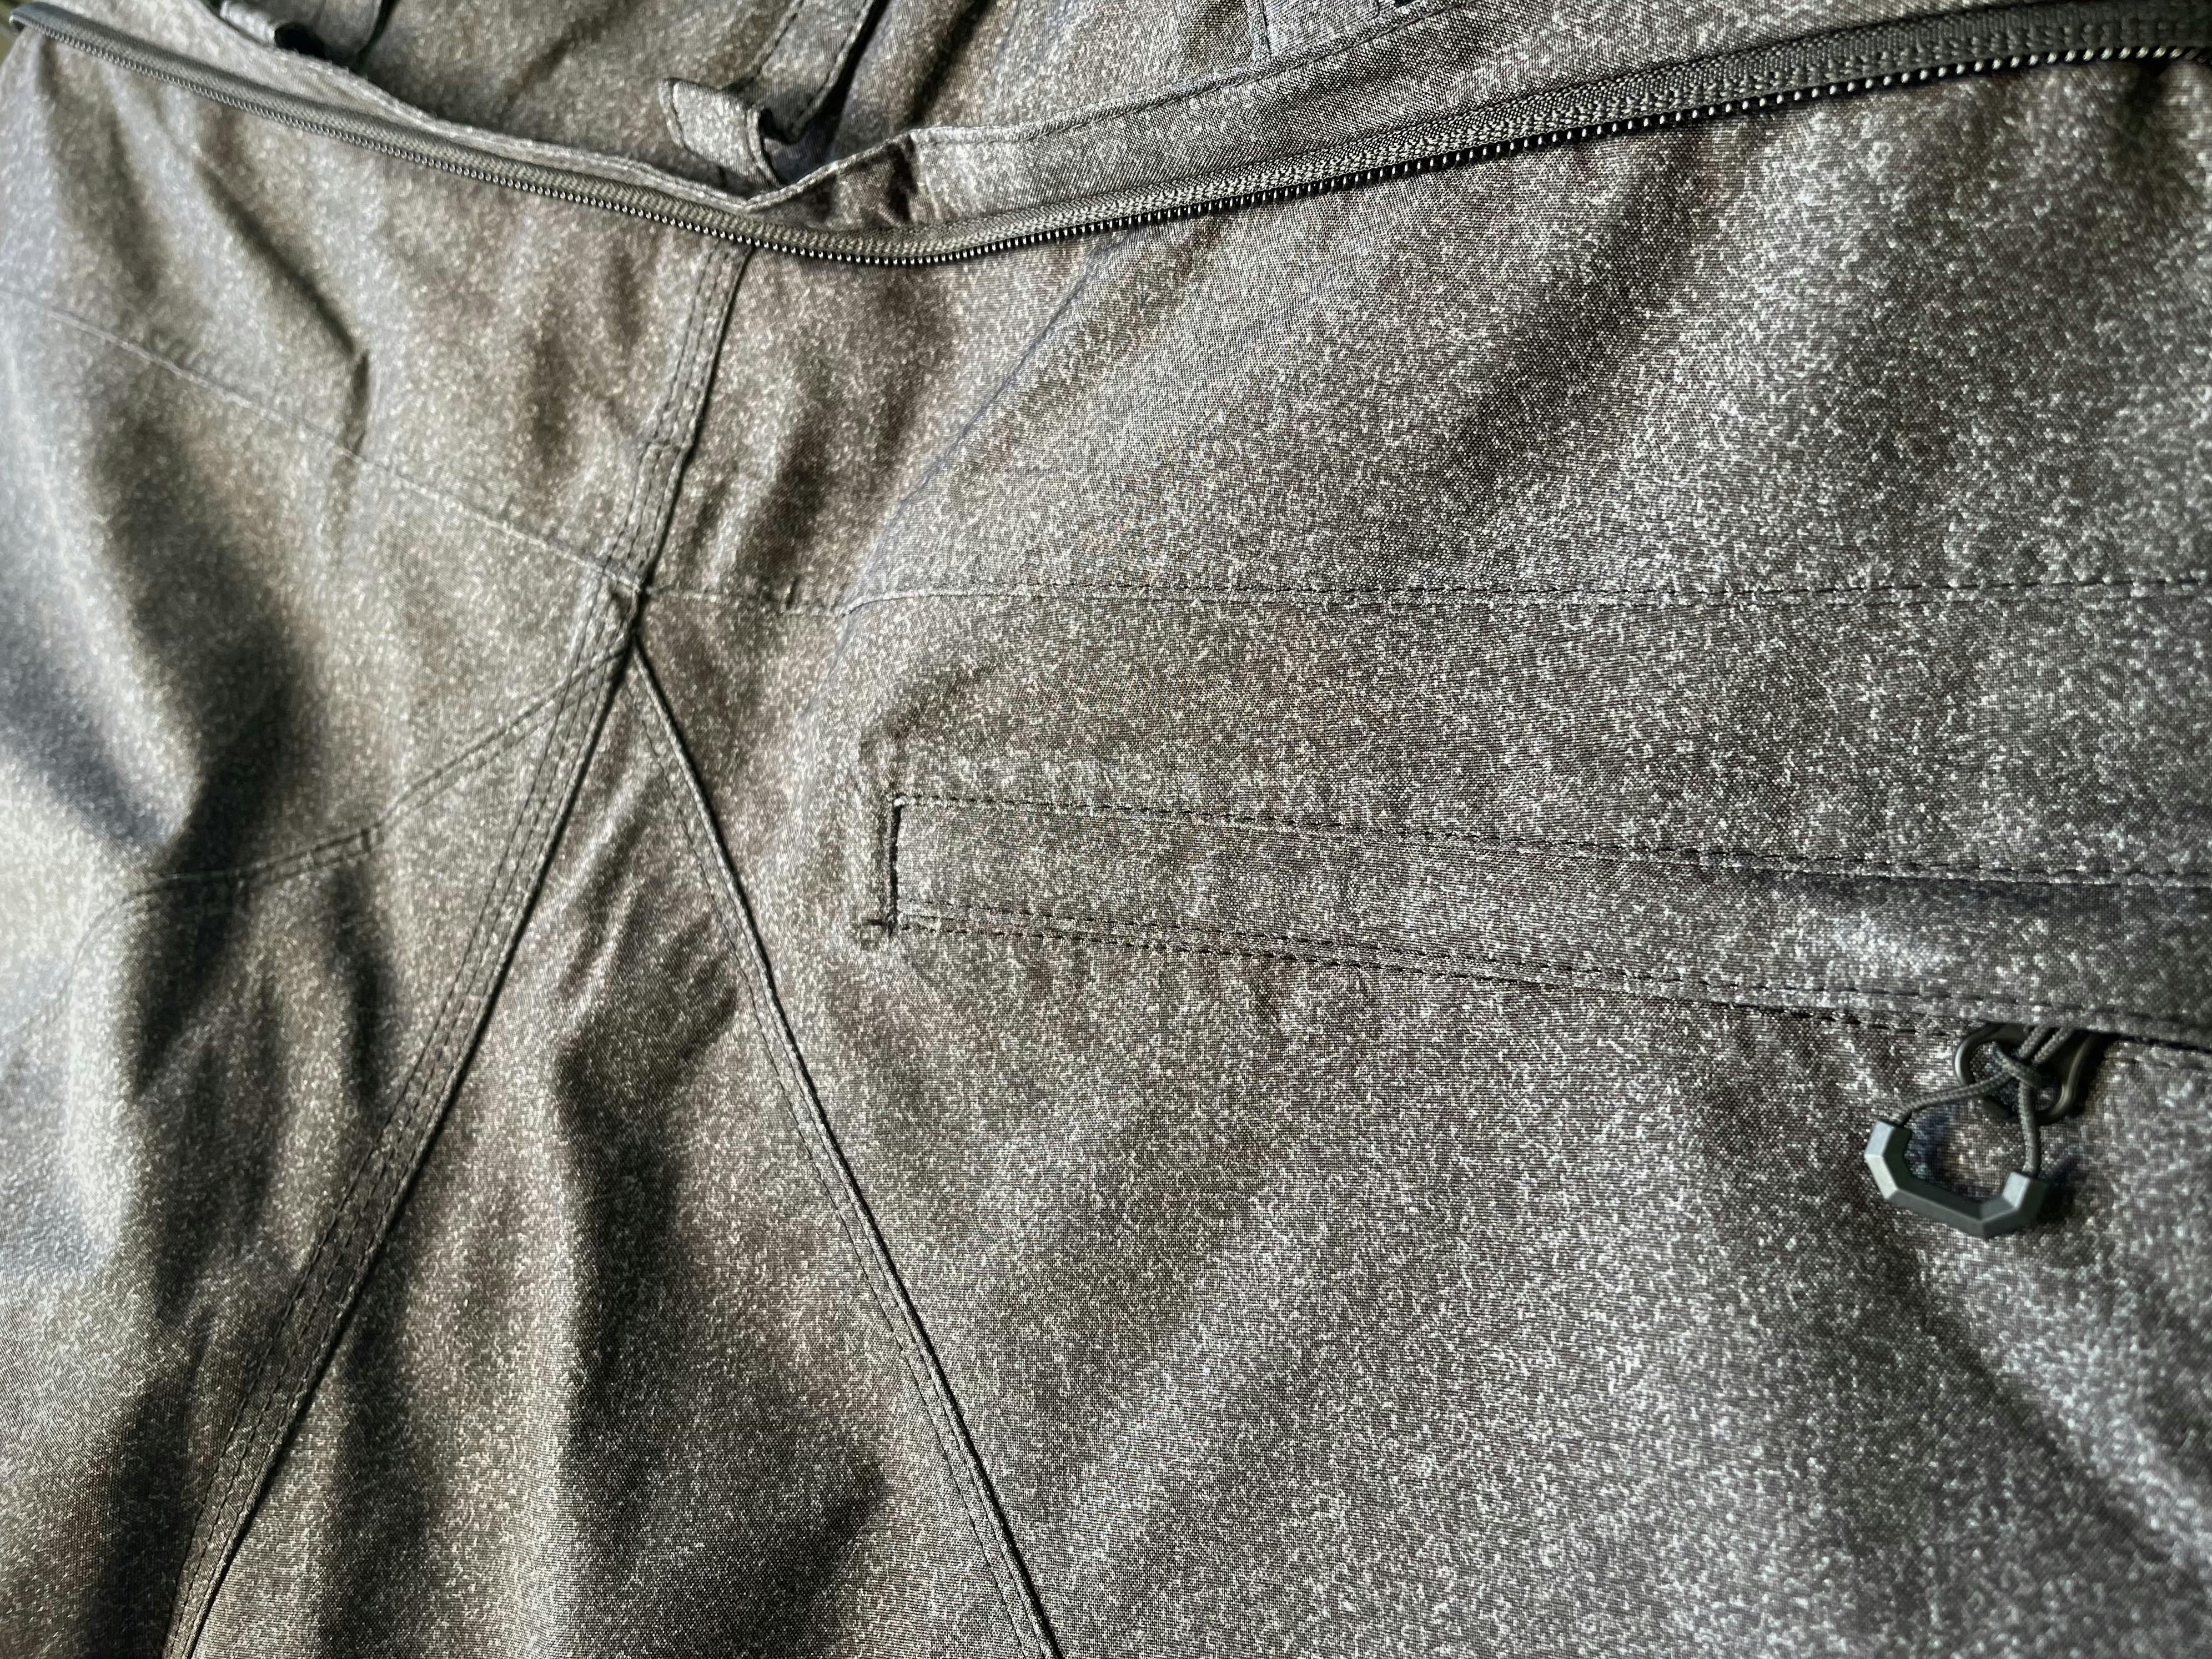 Back pocket and Zip Tech on the Volcom Men's L GORE-TEX® Pants.